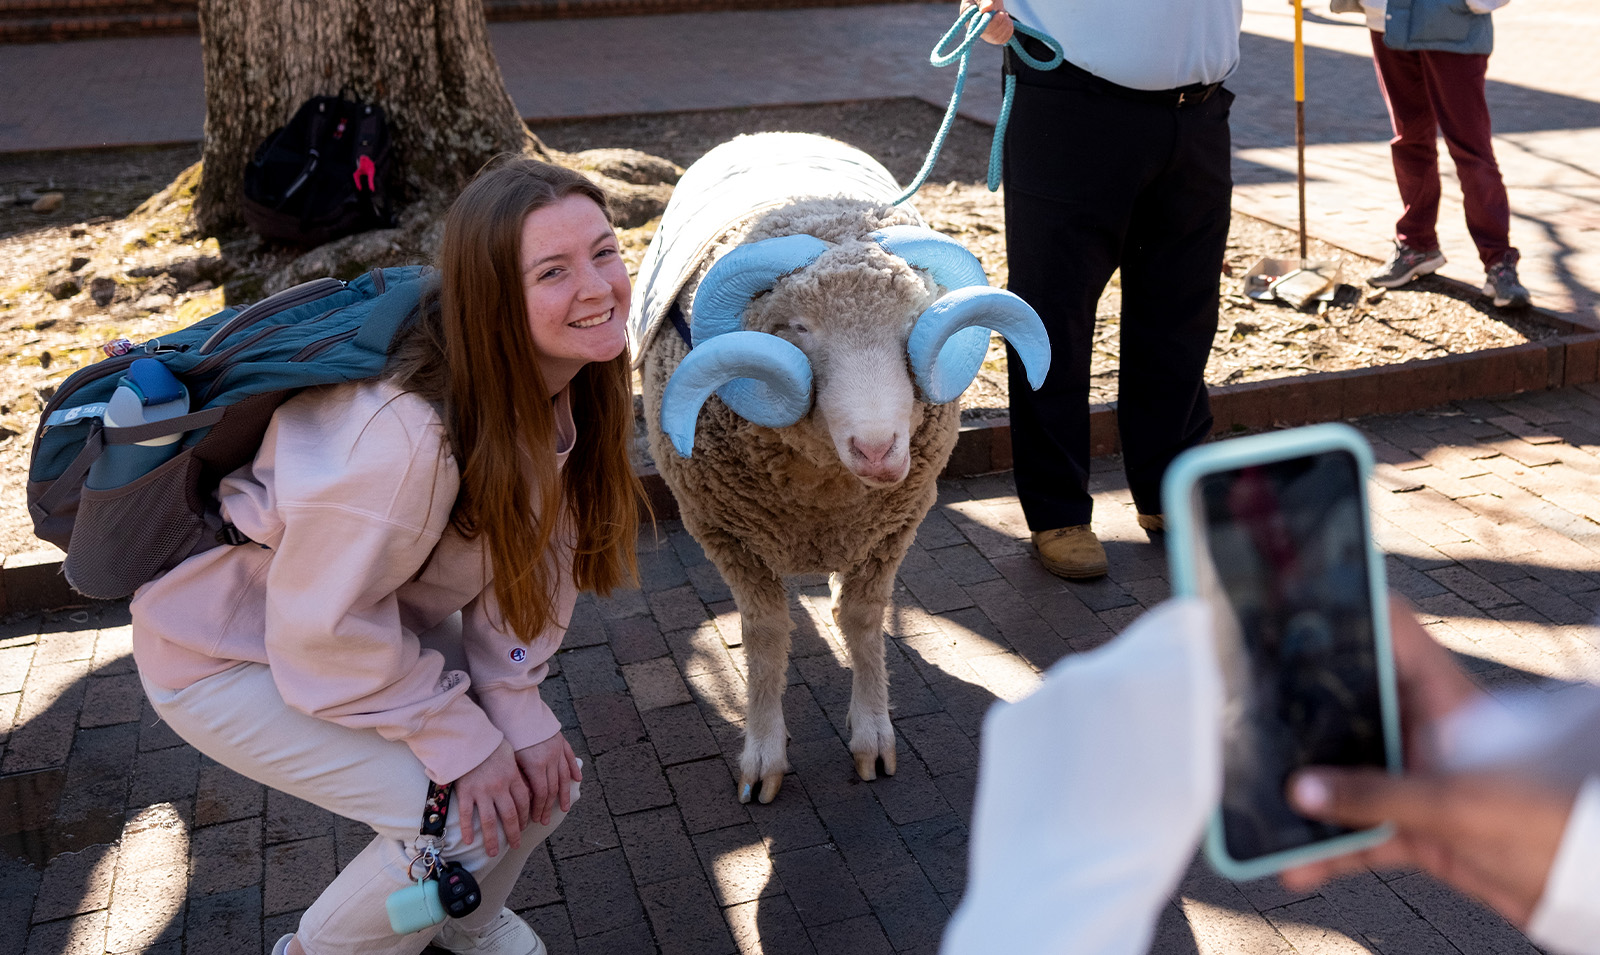 A student posing with a live ram mascot, Rameses, at the Pit on the campus of UNC-Chapel Hill.